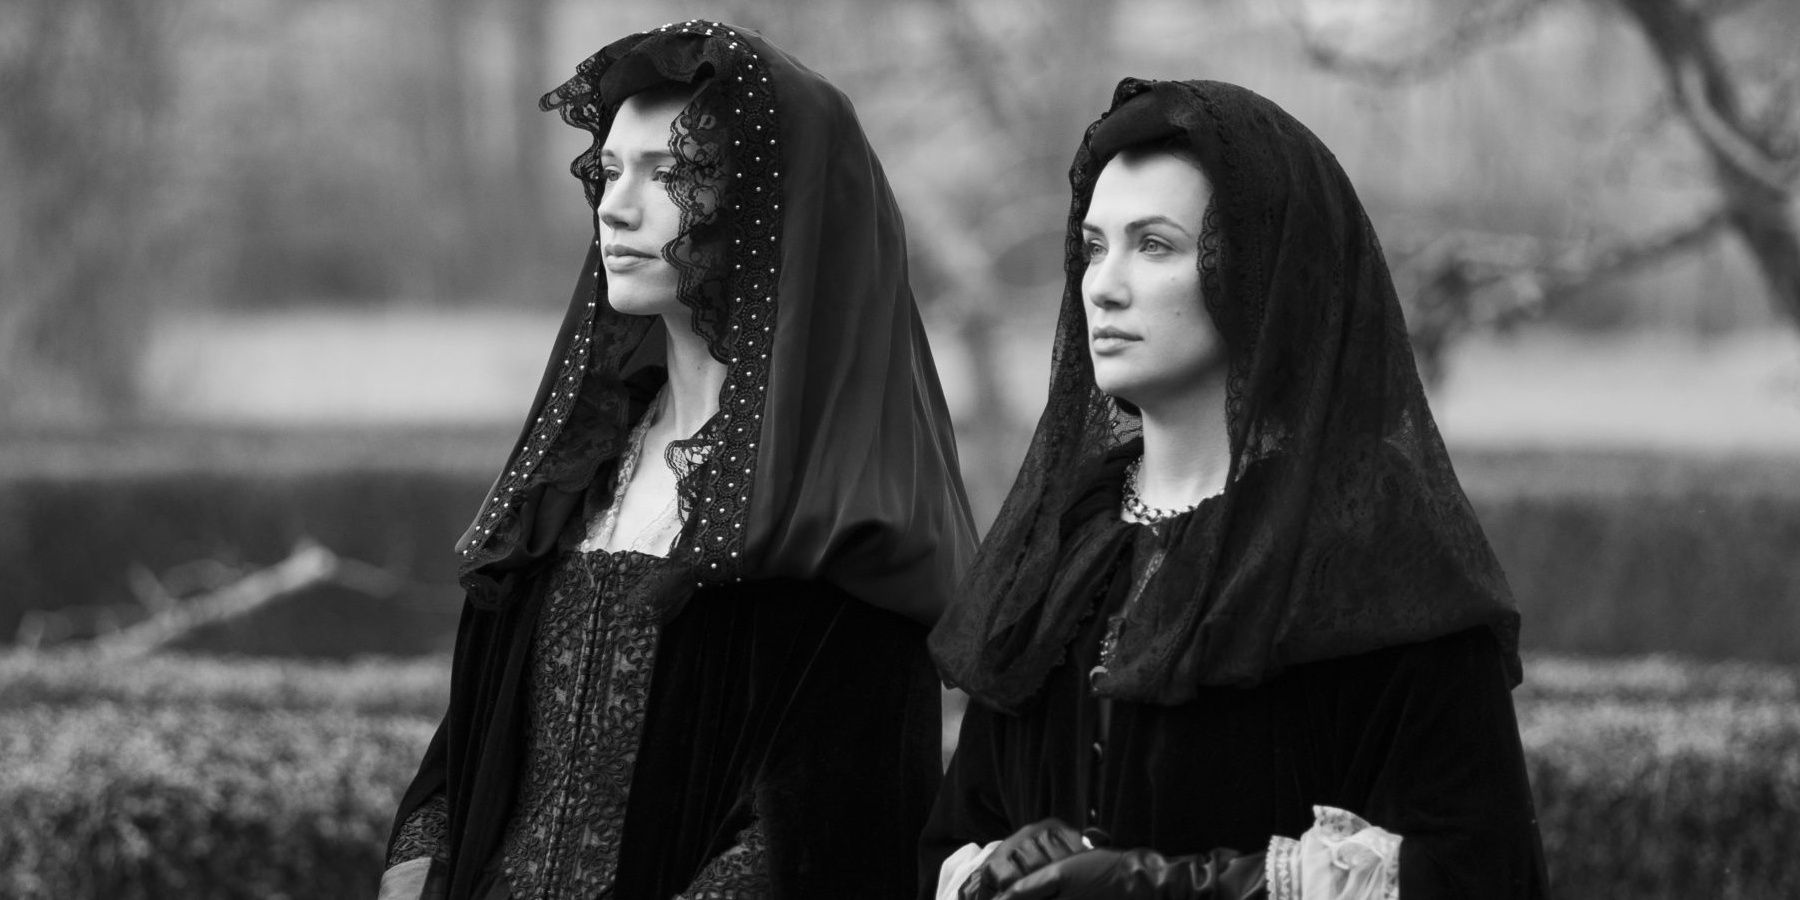 The Willoughby sisters, Perdita and Viola, stand solemnly in The Haunting of Bly Manor